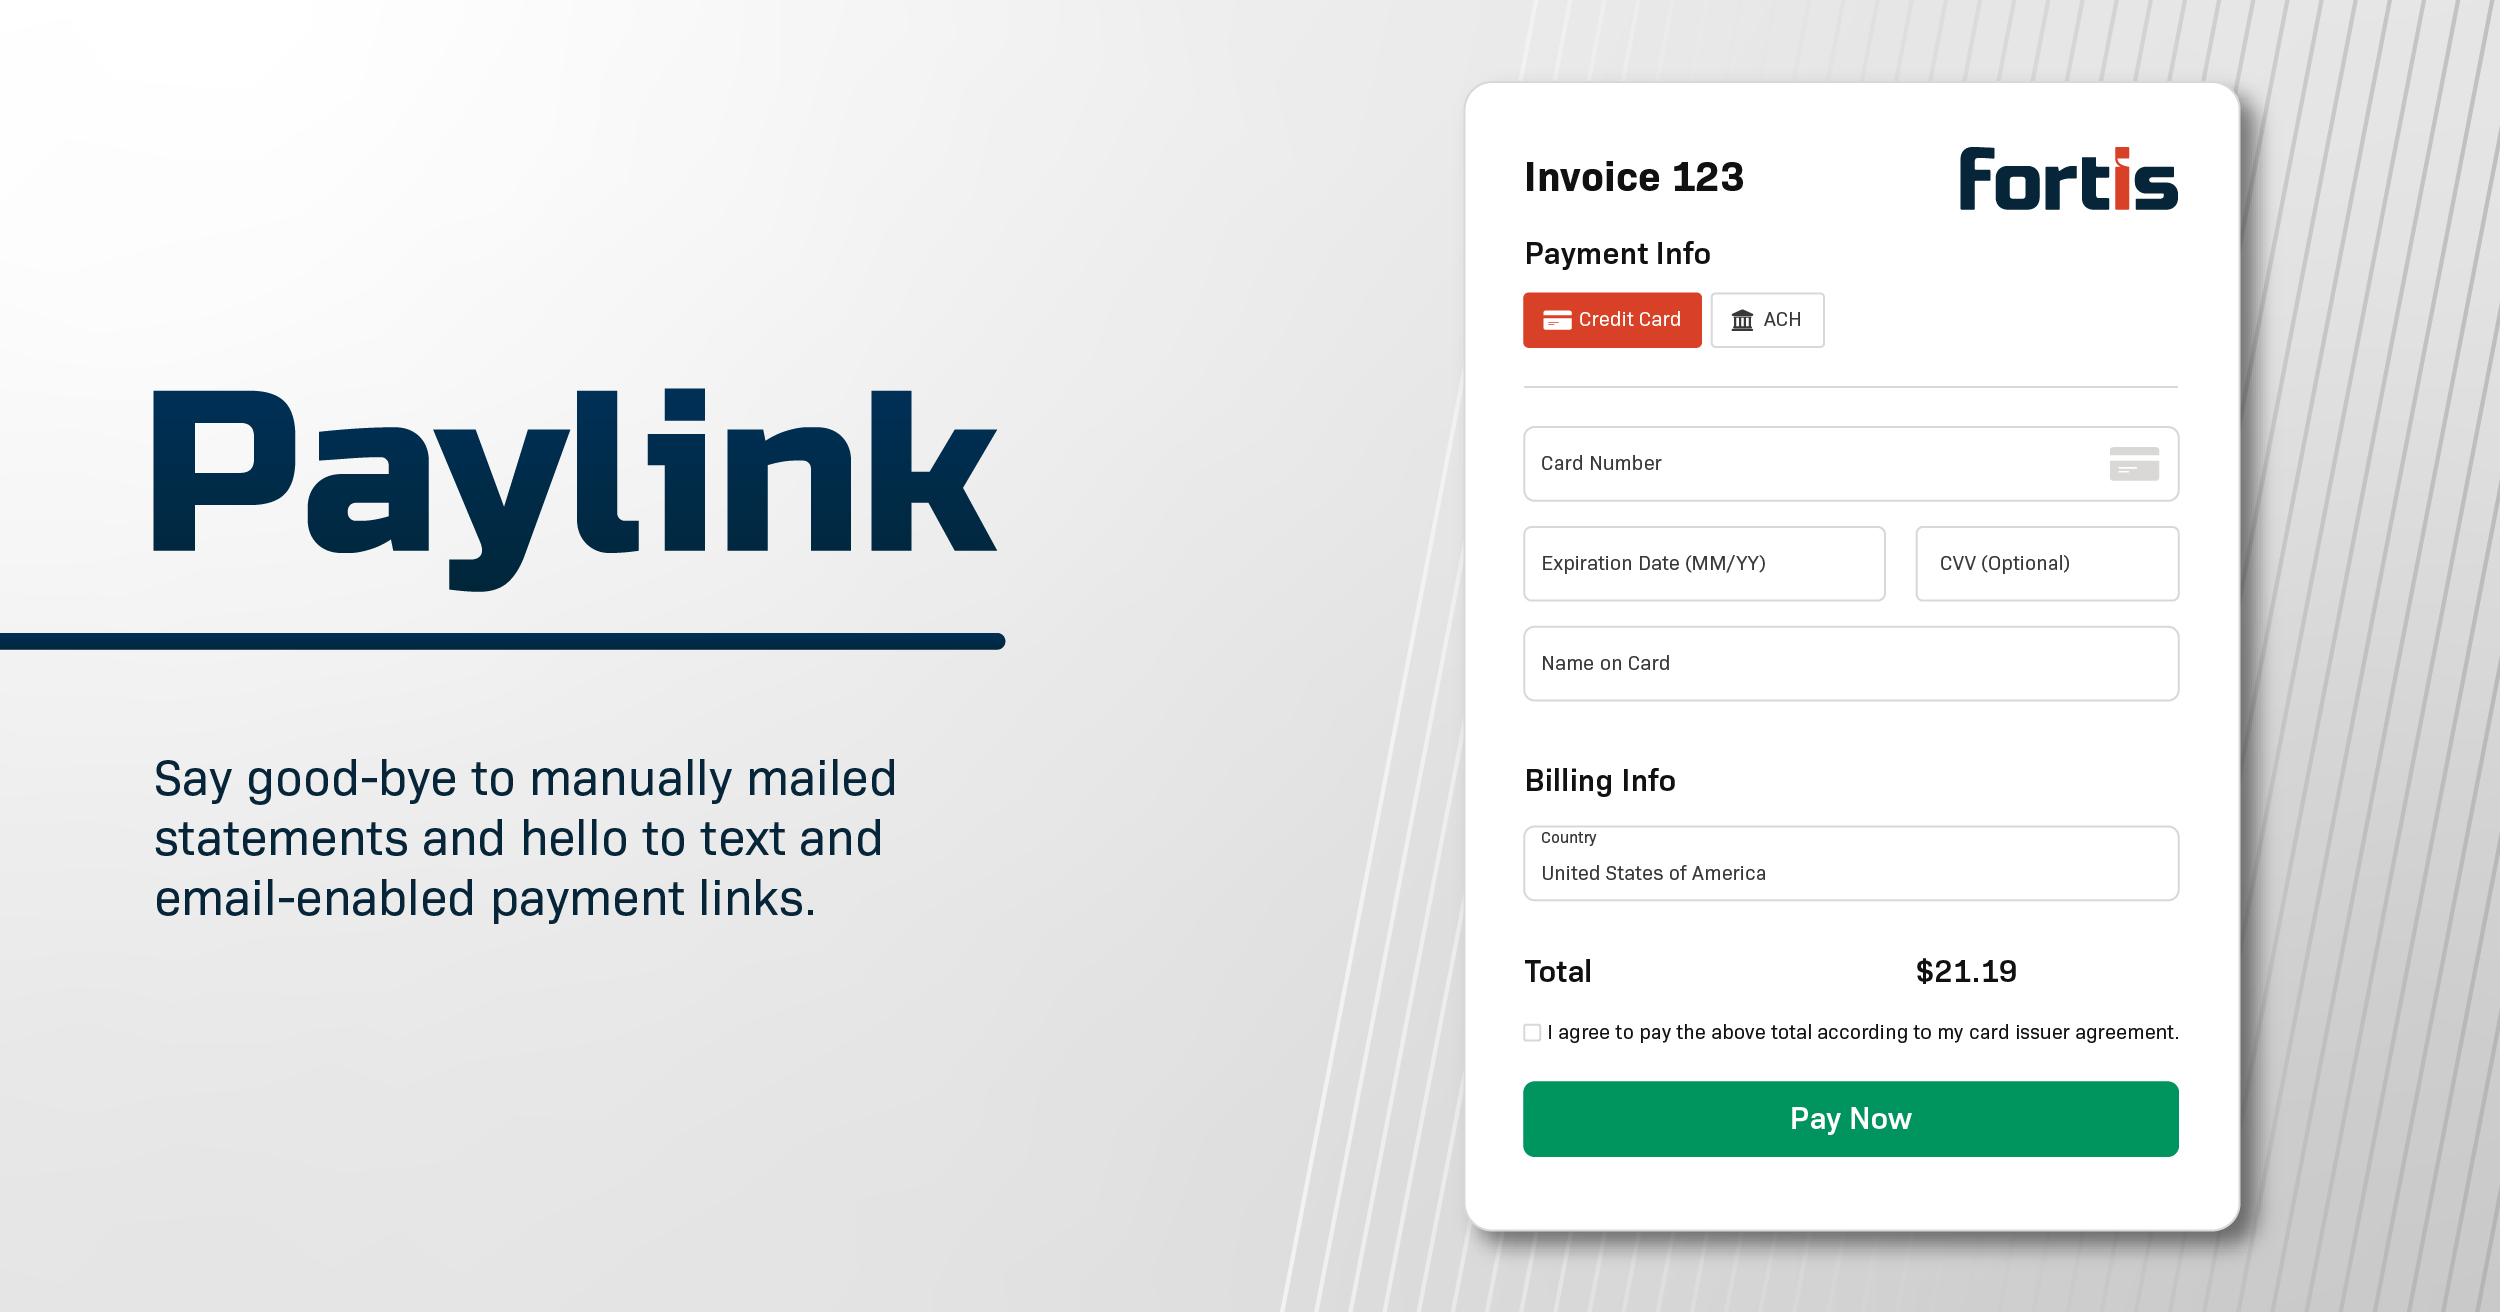 Paylink: Text and Email-Enabled Payment Links - Featured Image